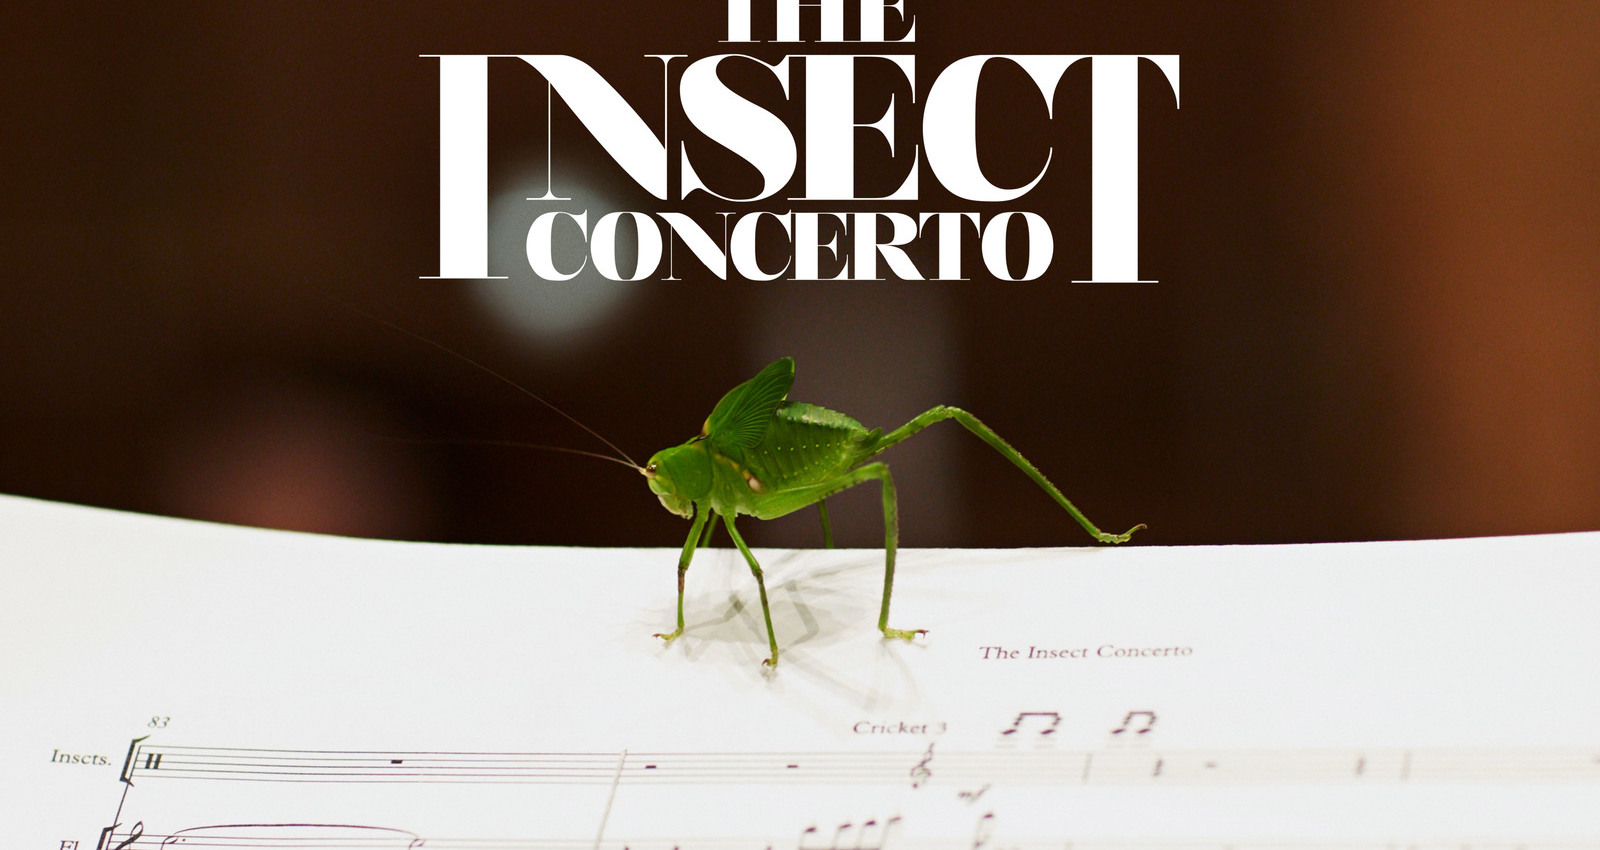 The Insect Concerto